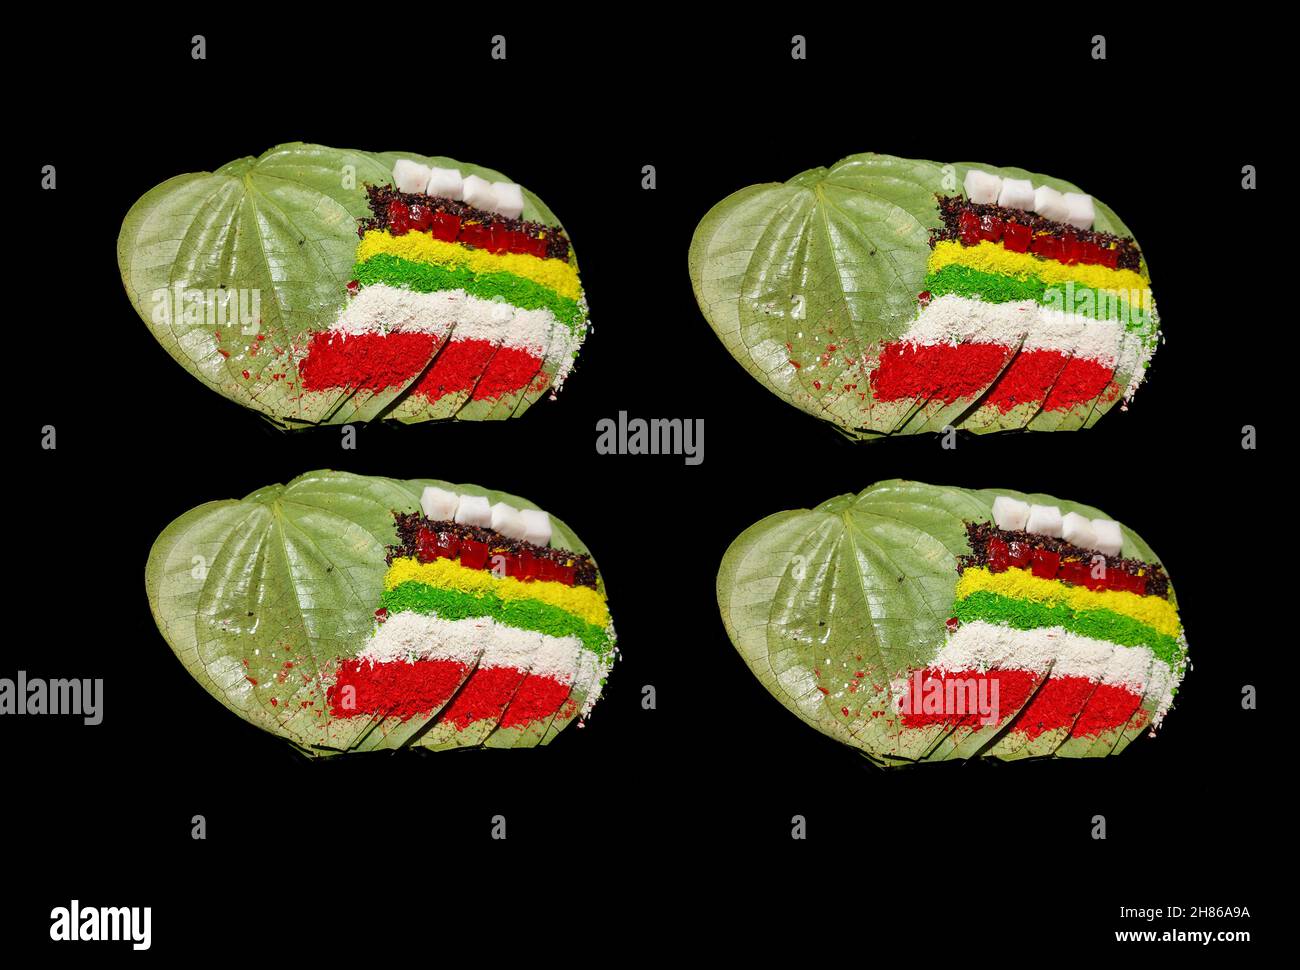 Sweet Paan. Paan is a preparation combining betel leaf with areca nut. Stock Photo